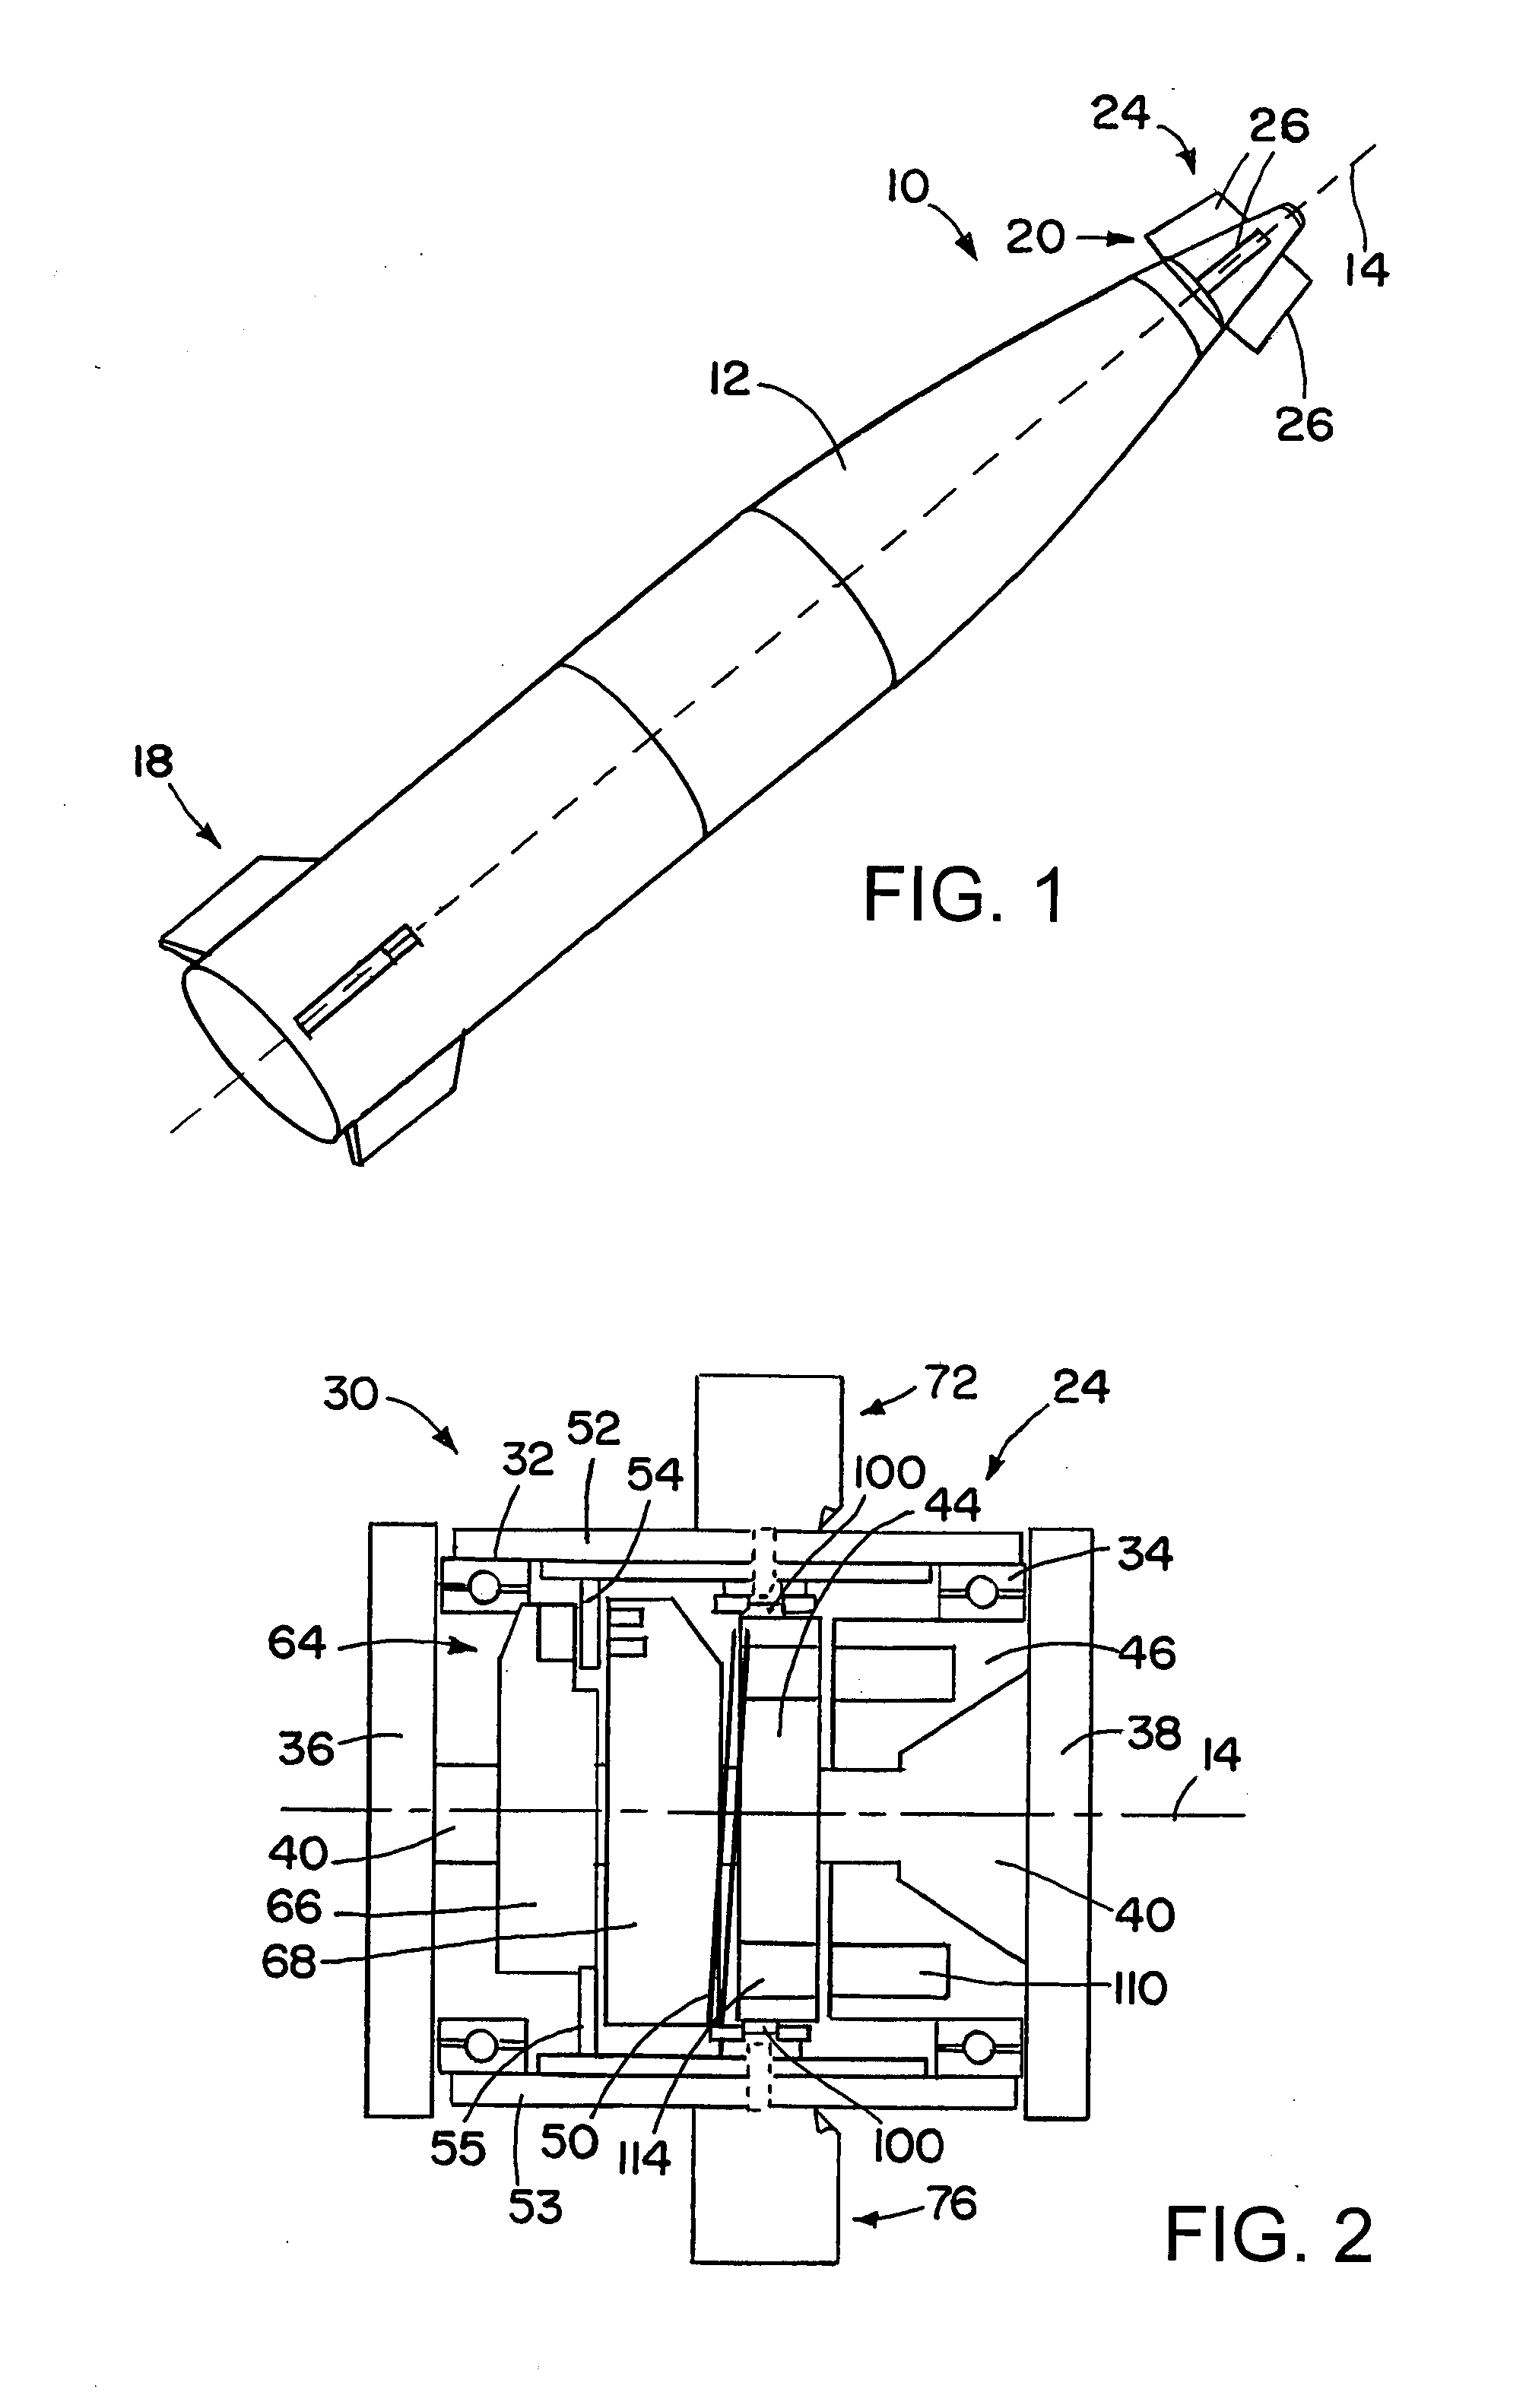 Guidance control for spinning or rolling projectile